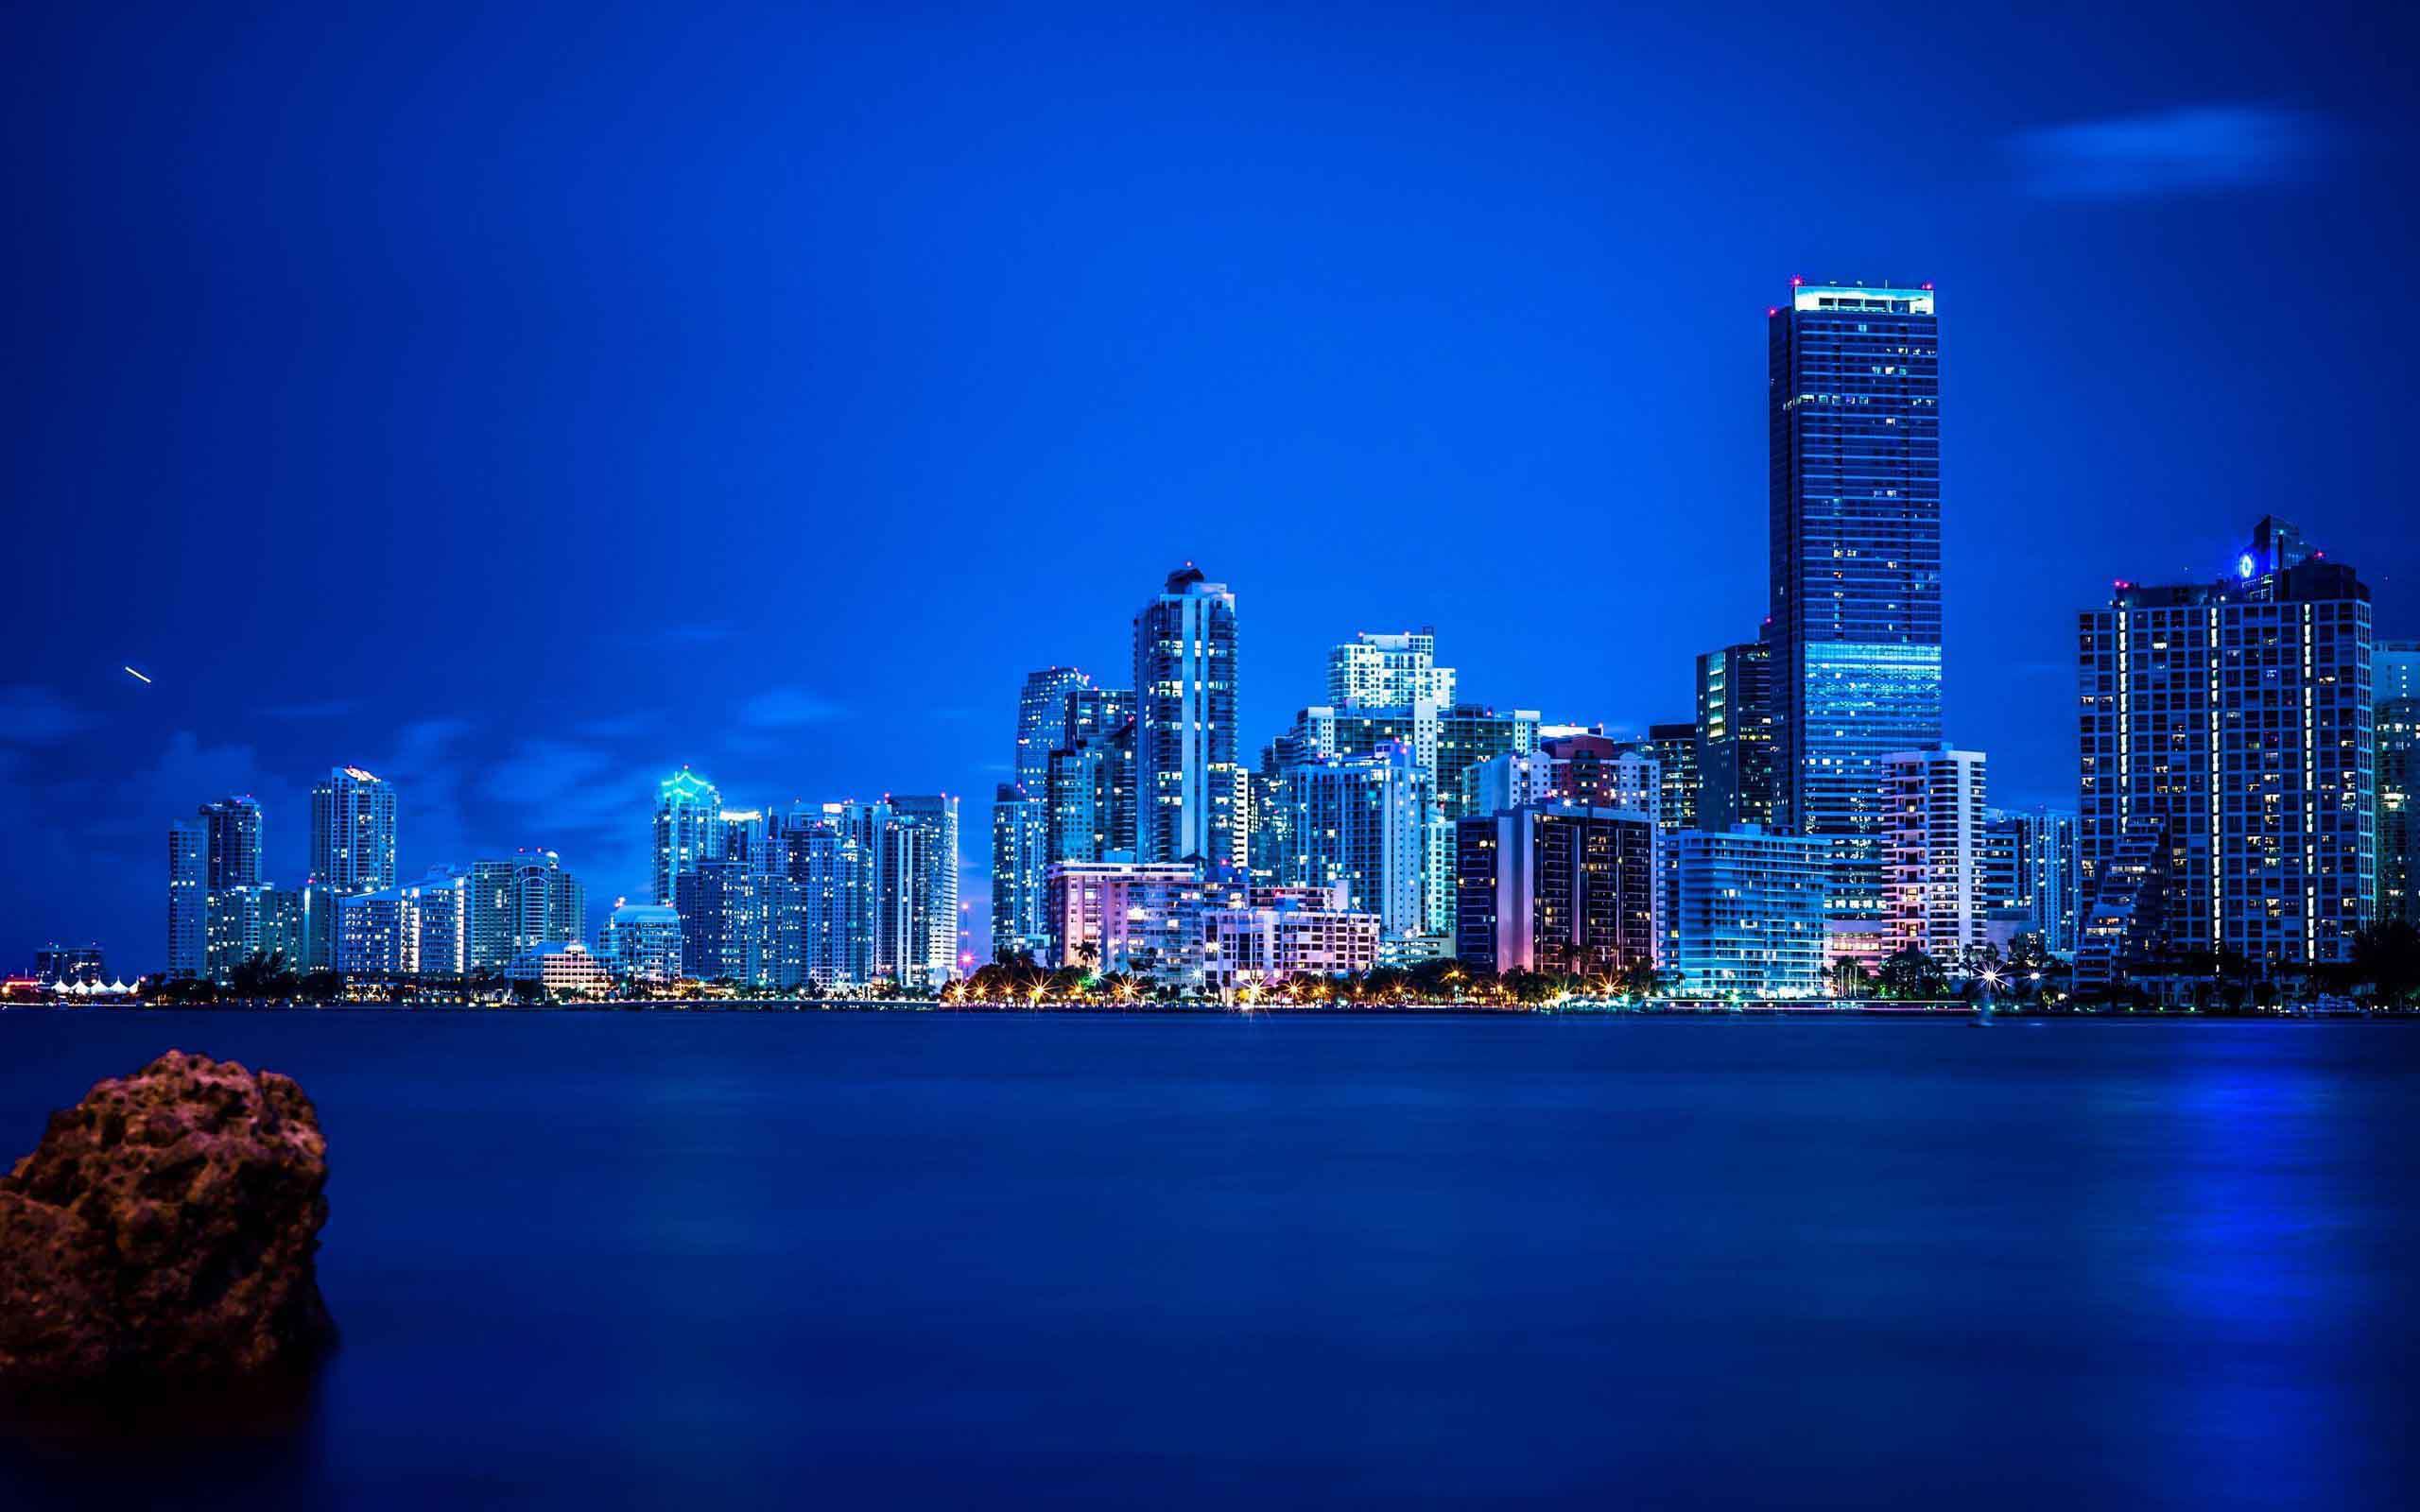 Miami 4K wallpaper for your desktop or mobile screen free and easy to download